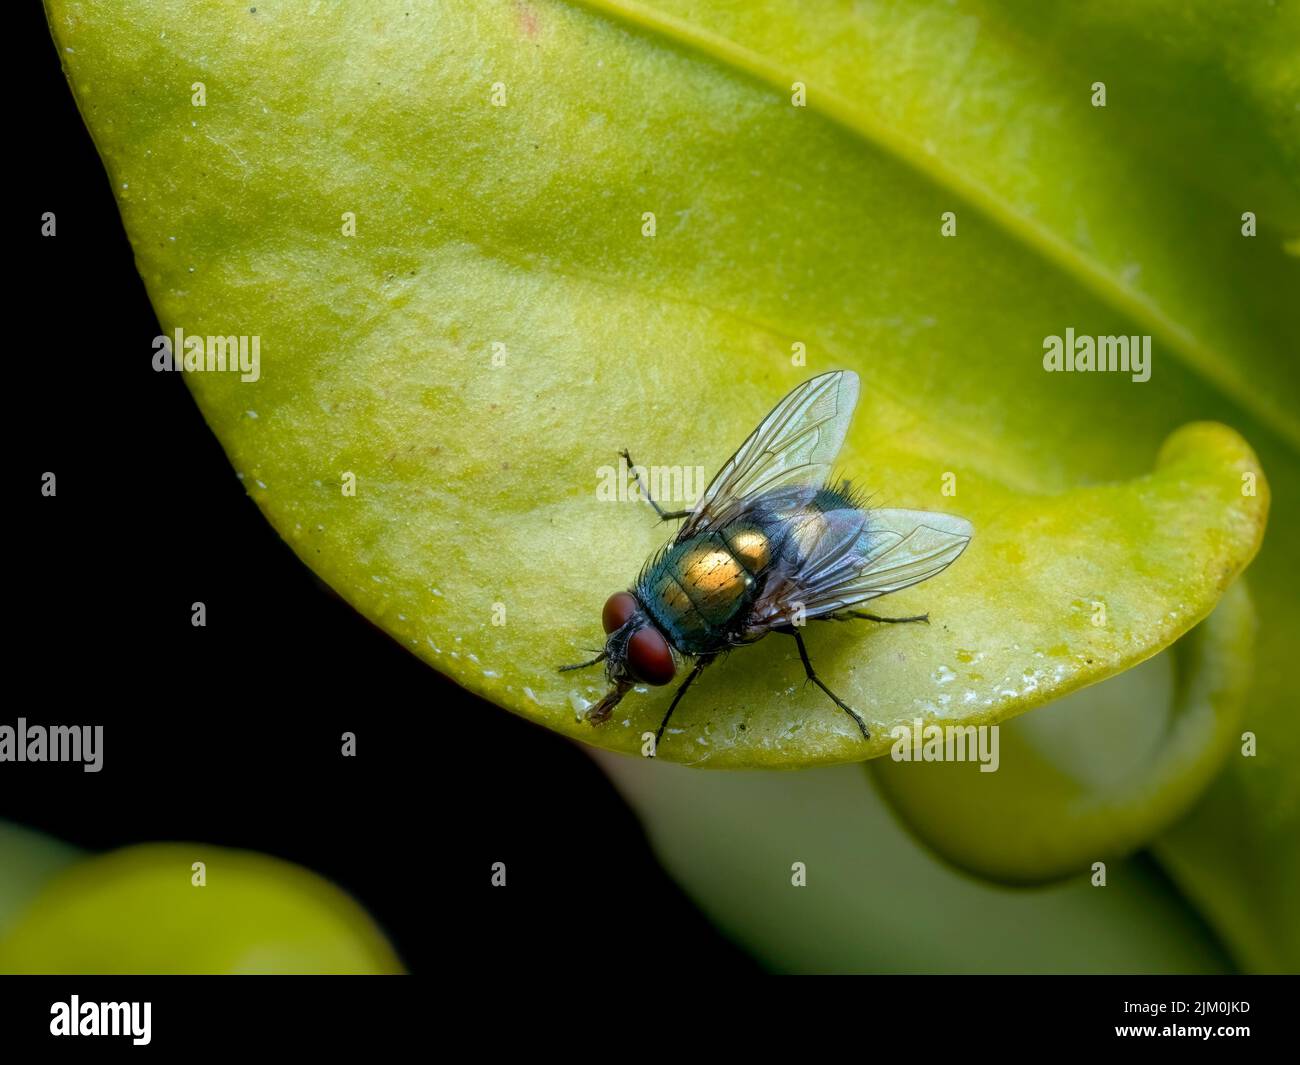 very colorful greenbottle blowfly, Lucilia sericata, feeding on tiny nectar droplets secreted by the leaf of a carnivorous yellow pitcher plant (Sarra Stock Photo